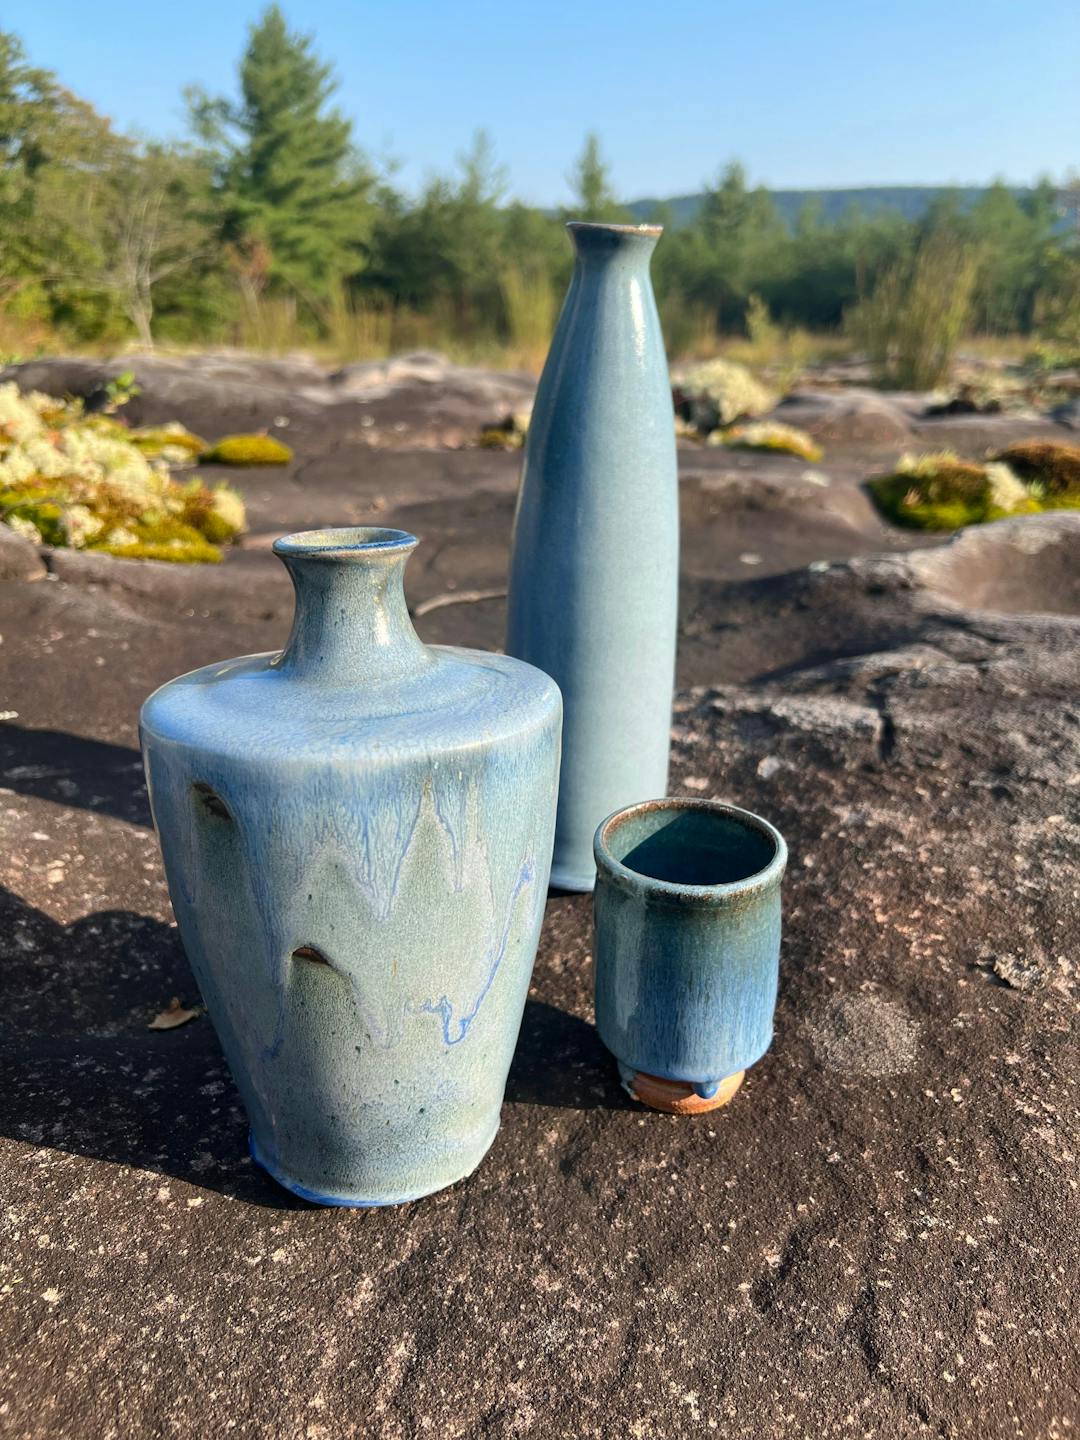 Sky blue vases and a dark blue cup set